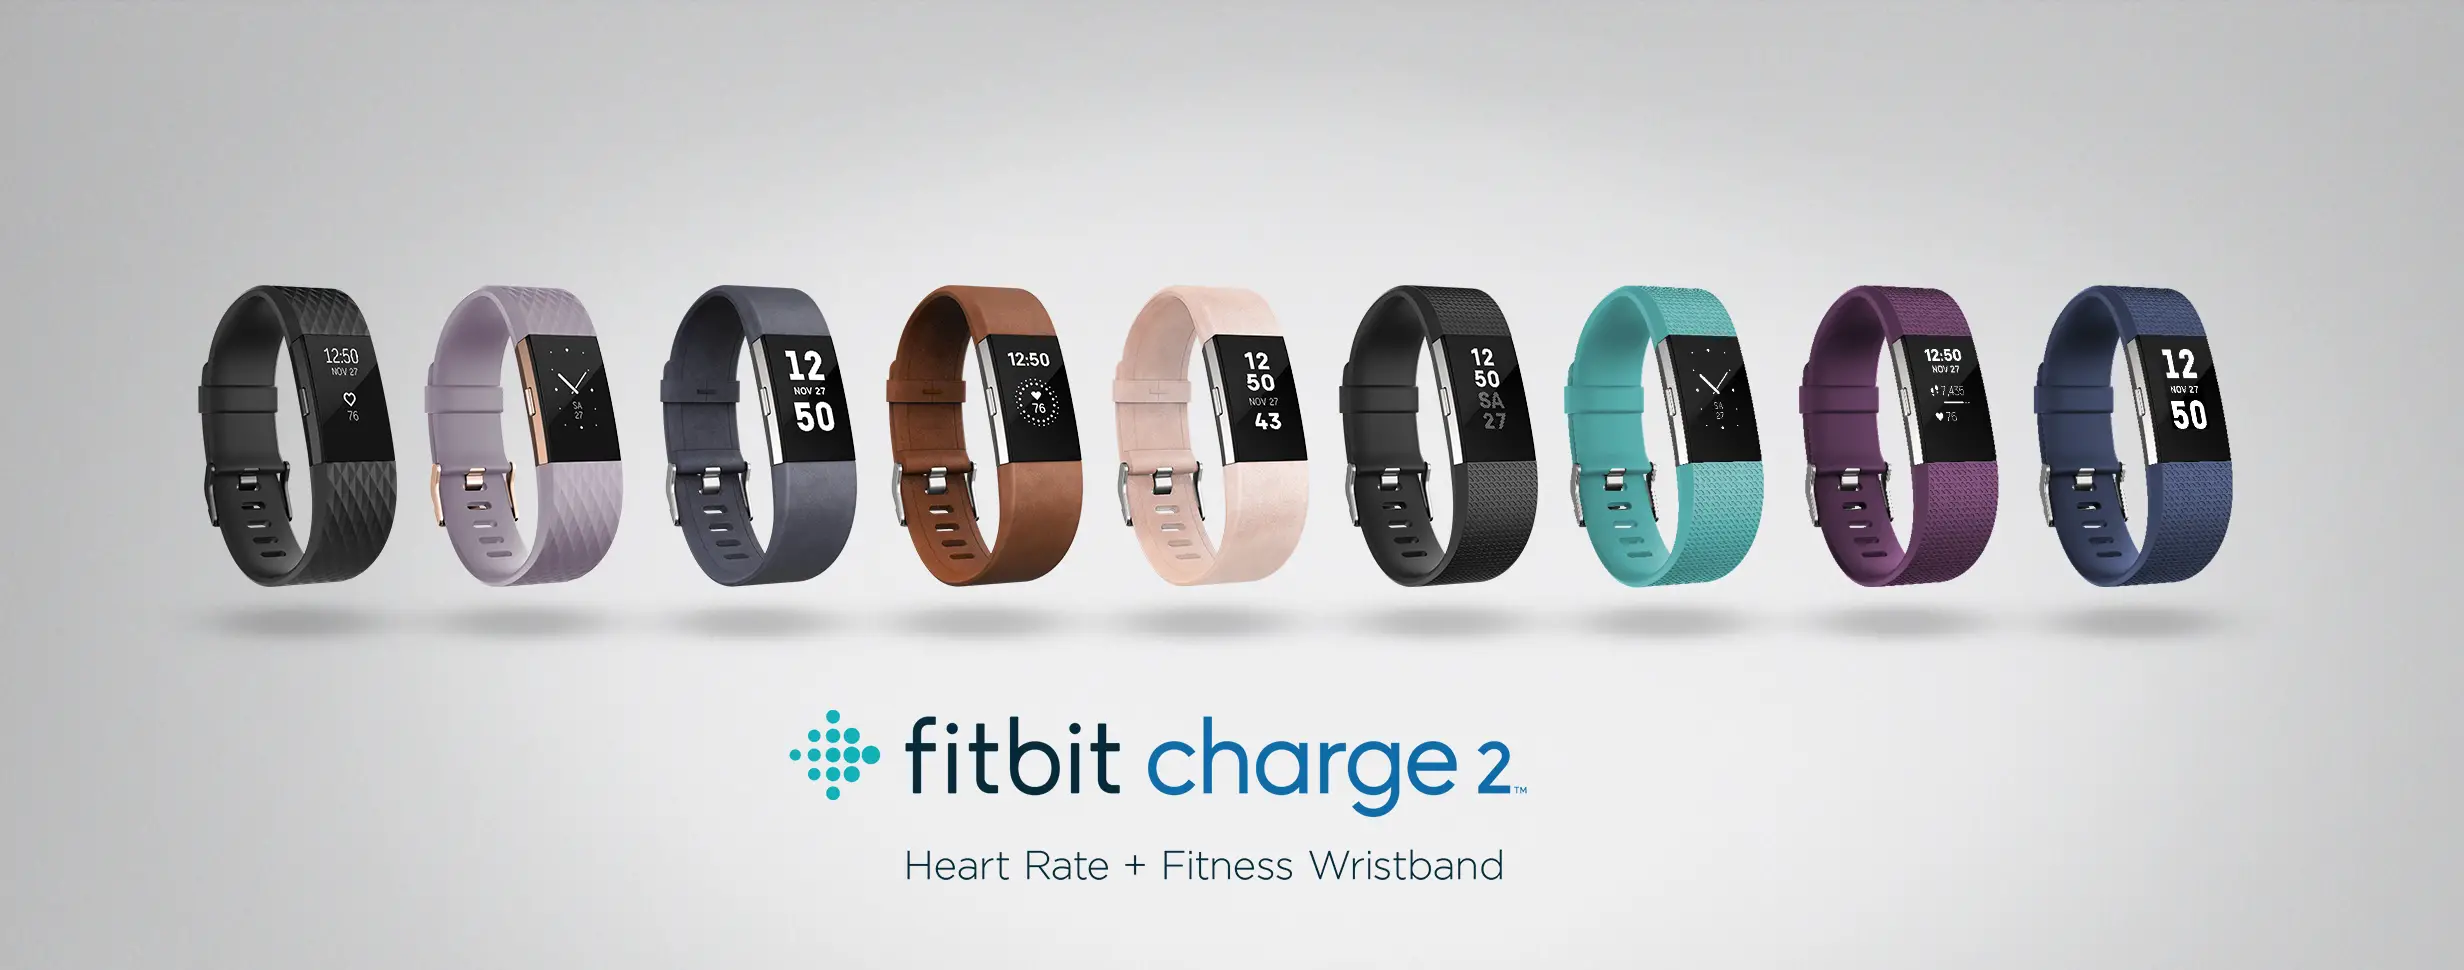 Fitbit unveils the Charge 2 and the Flex 2 with new features and